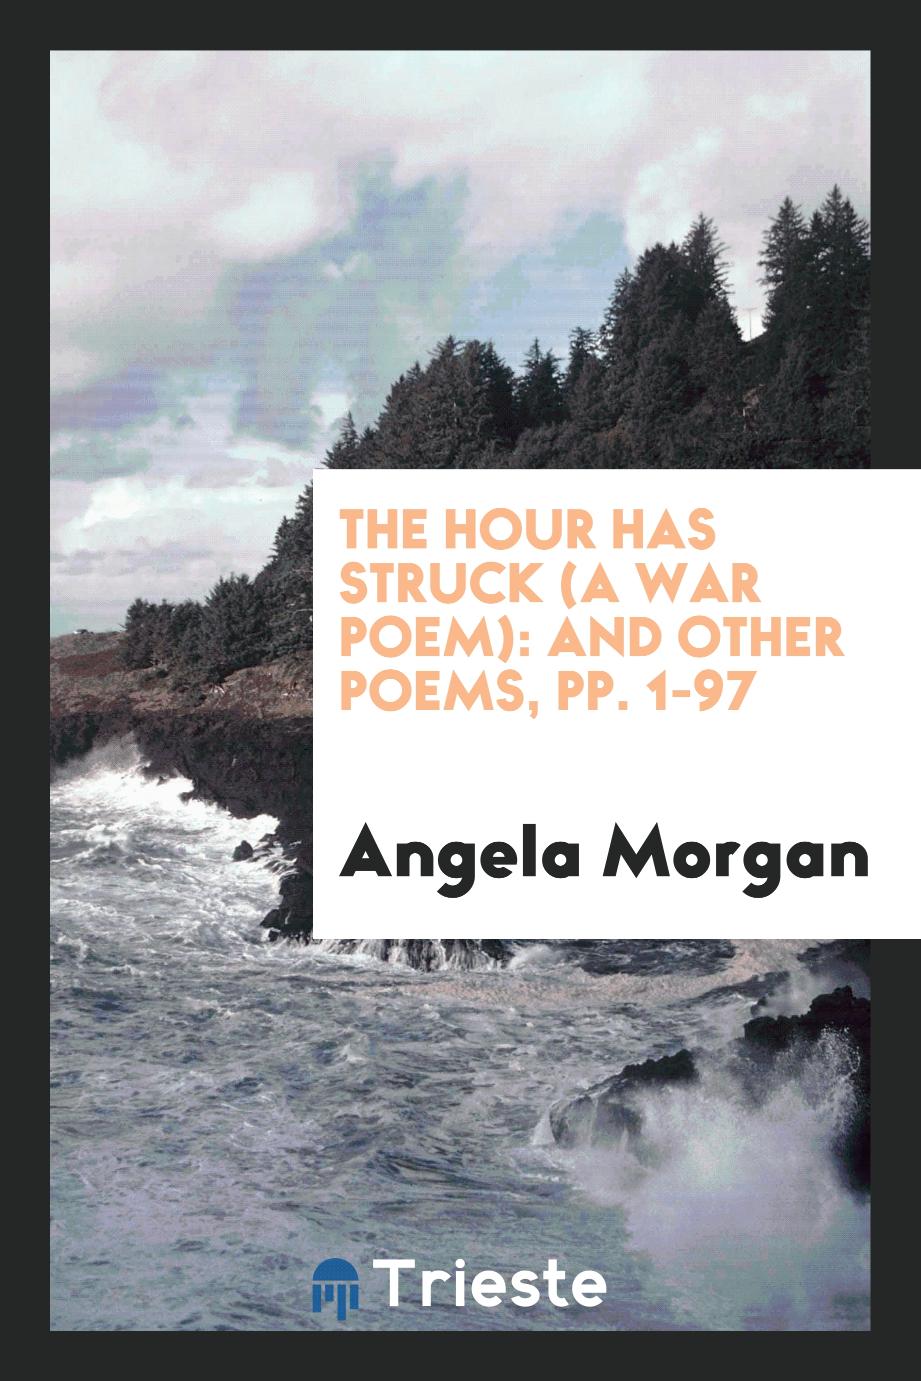 The Hour Has Struck (A War Poem): And Other Poems, pp. 1-97